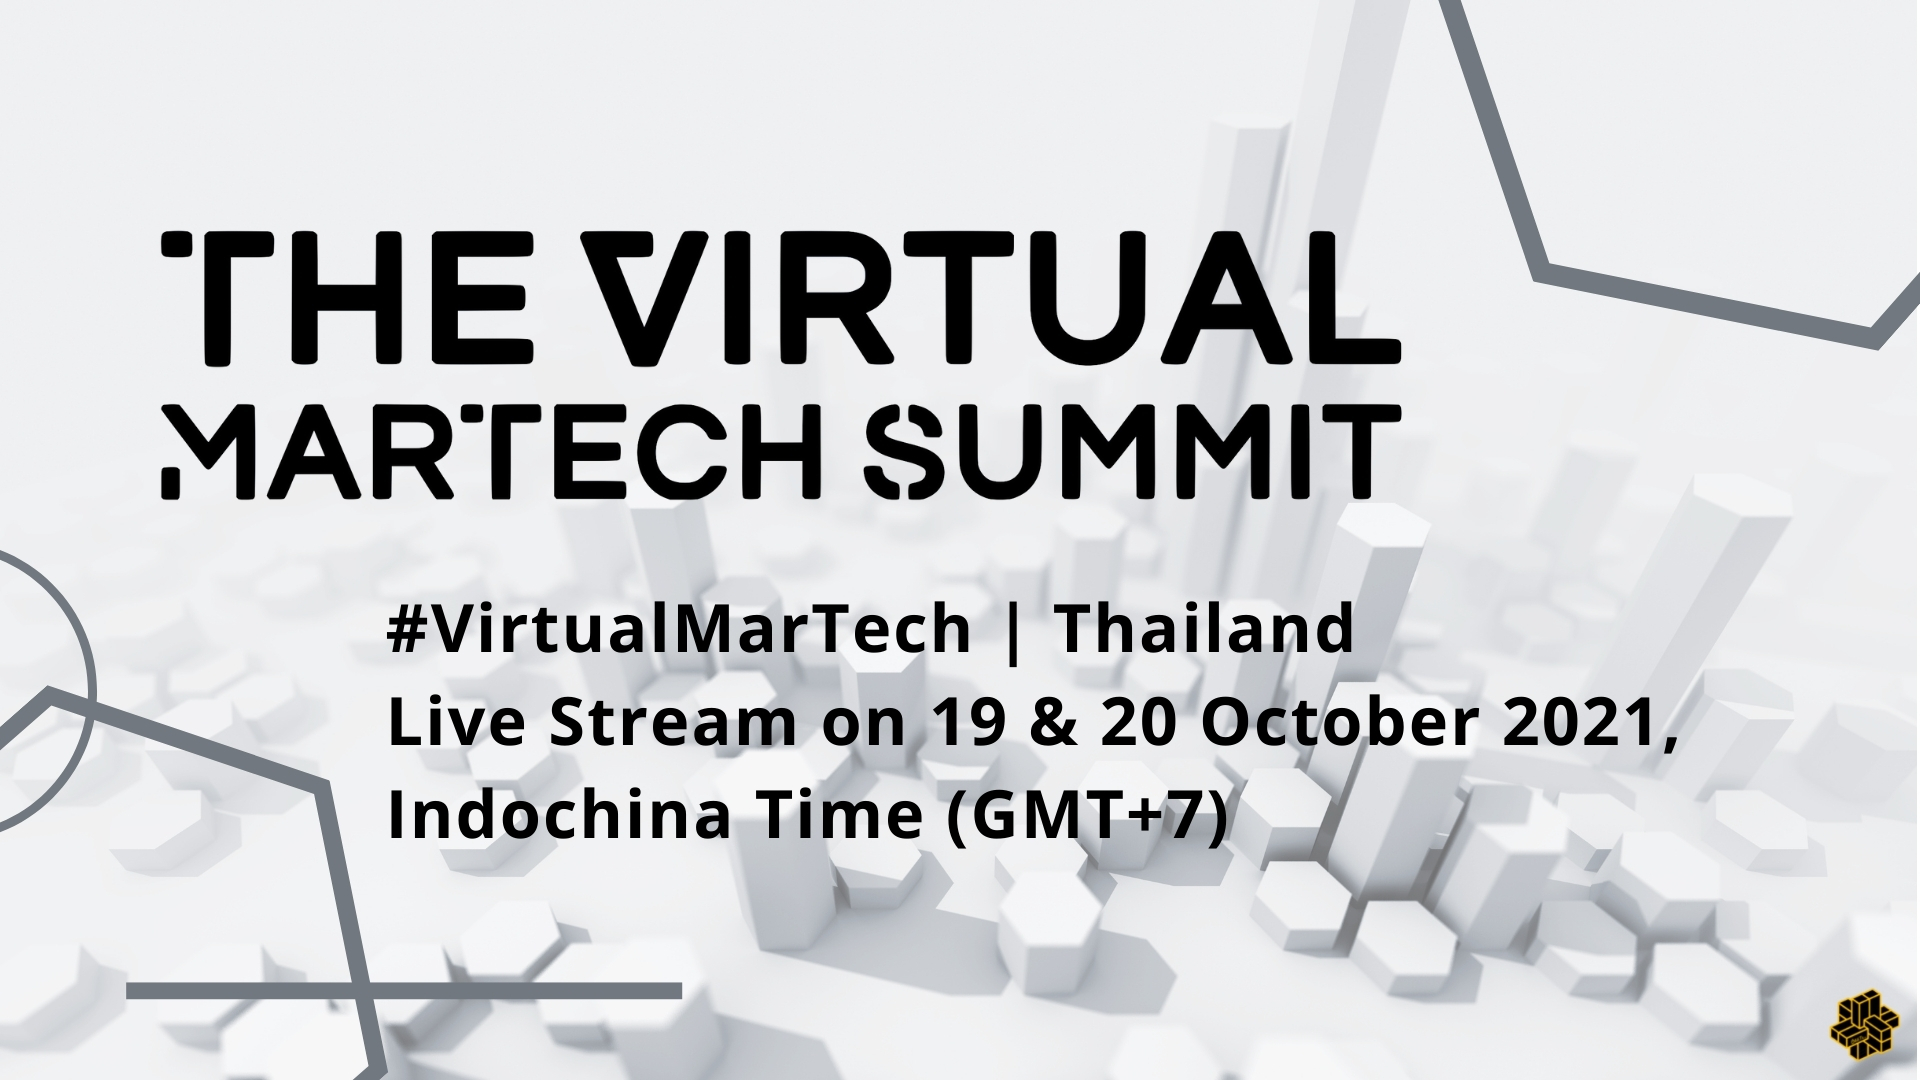 The Virtual MarTech Summit Thailand  organized by BEETc